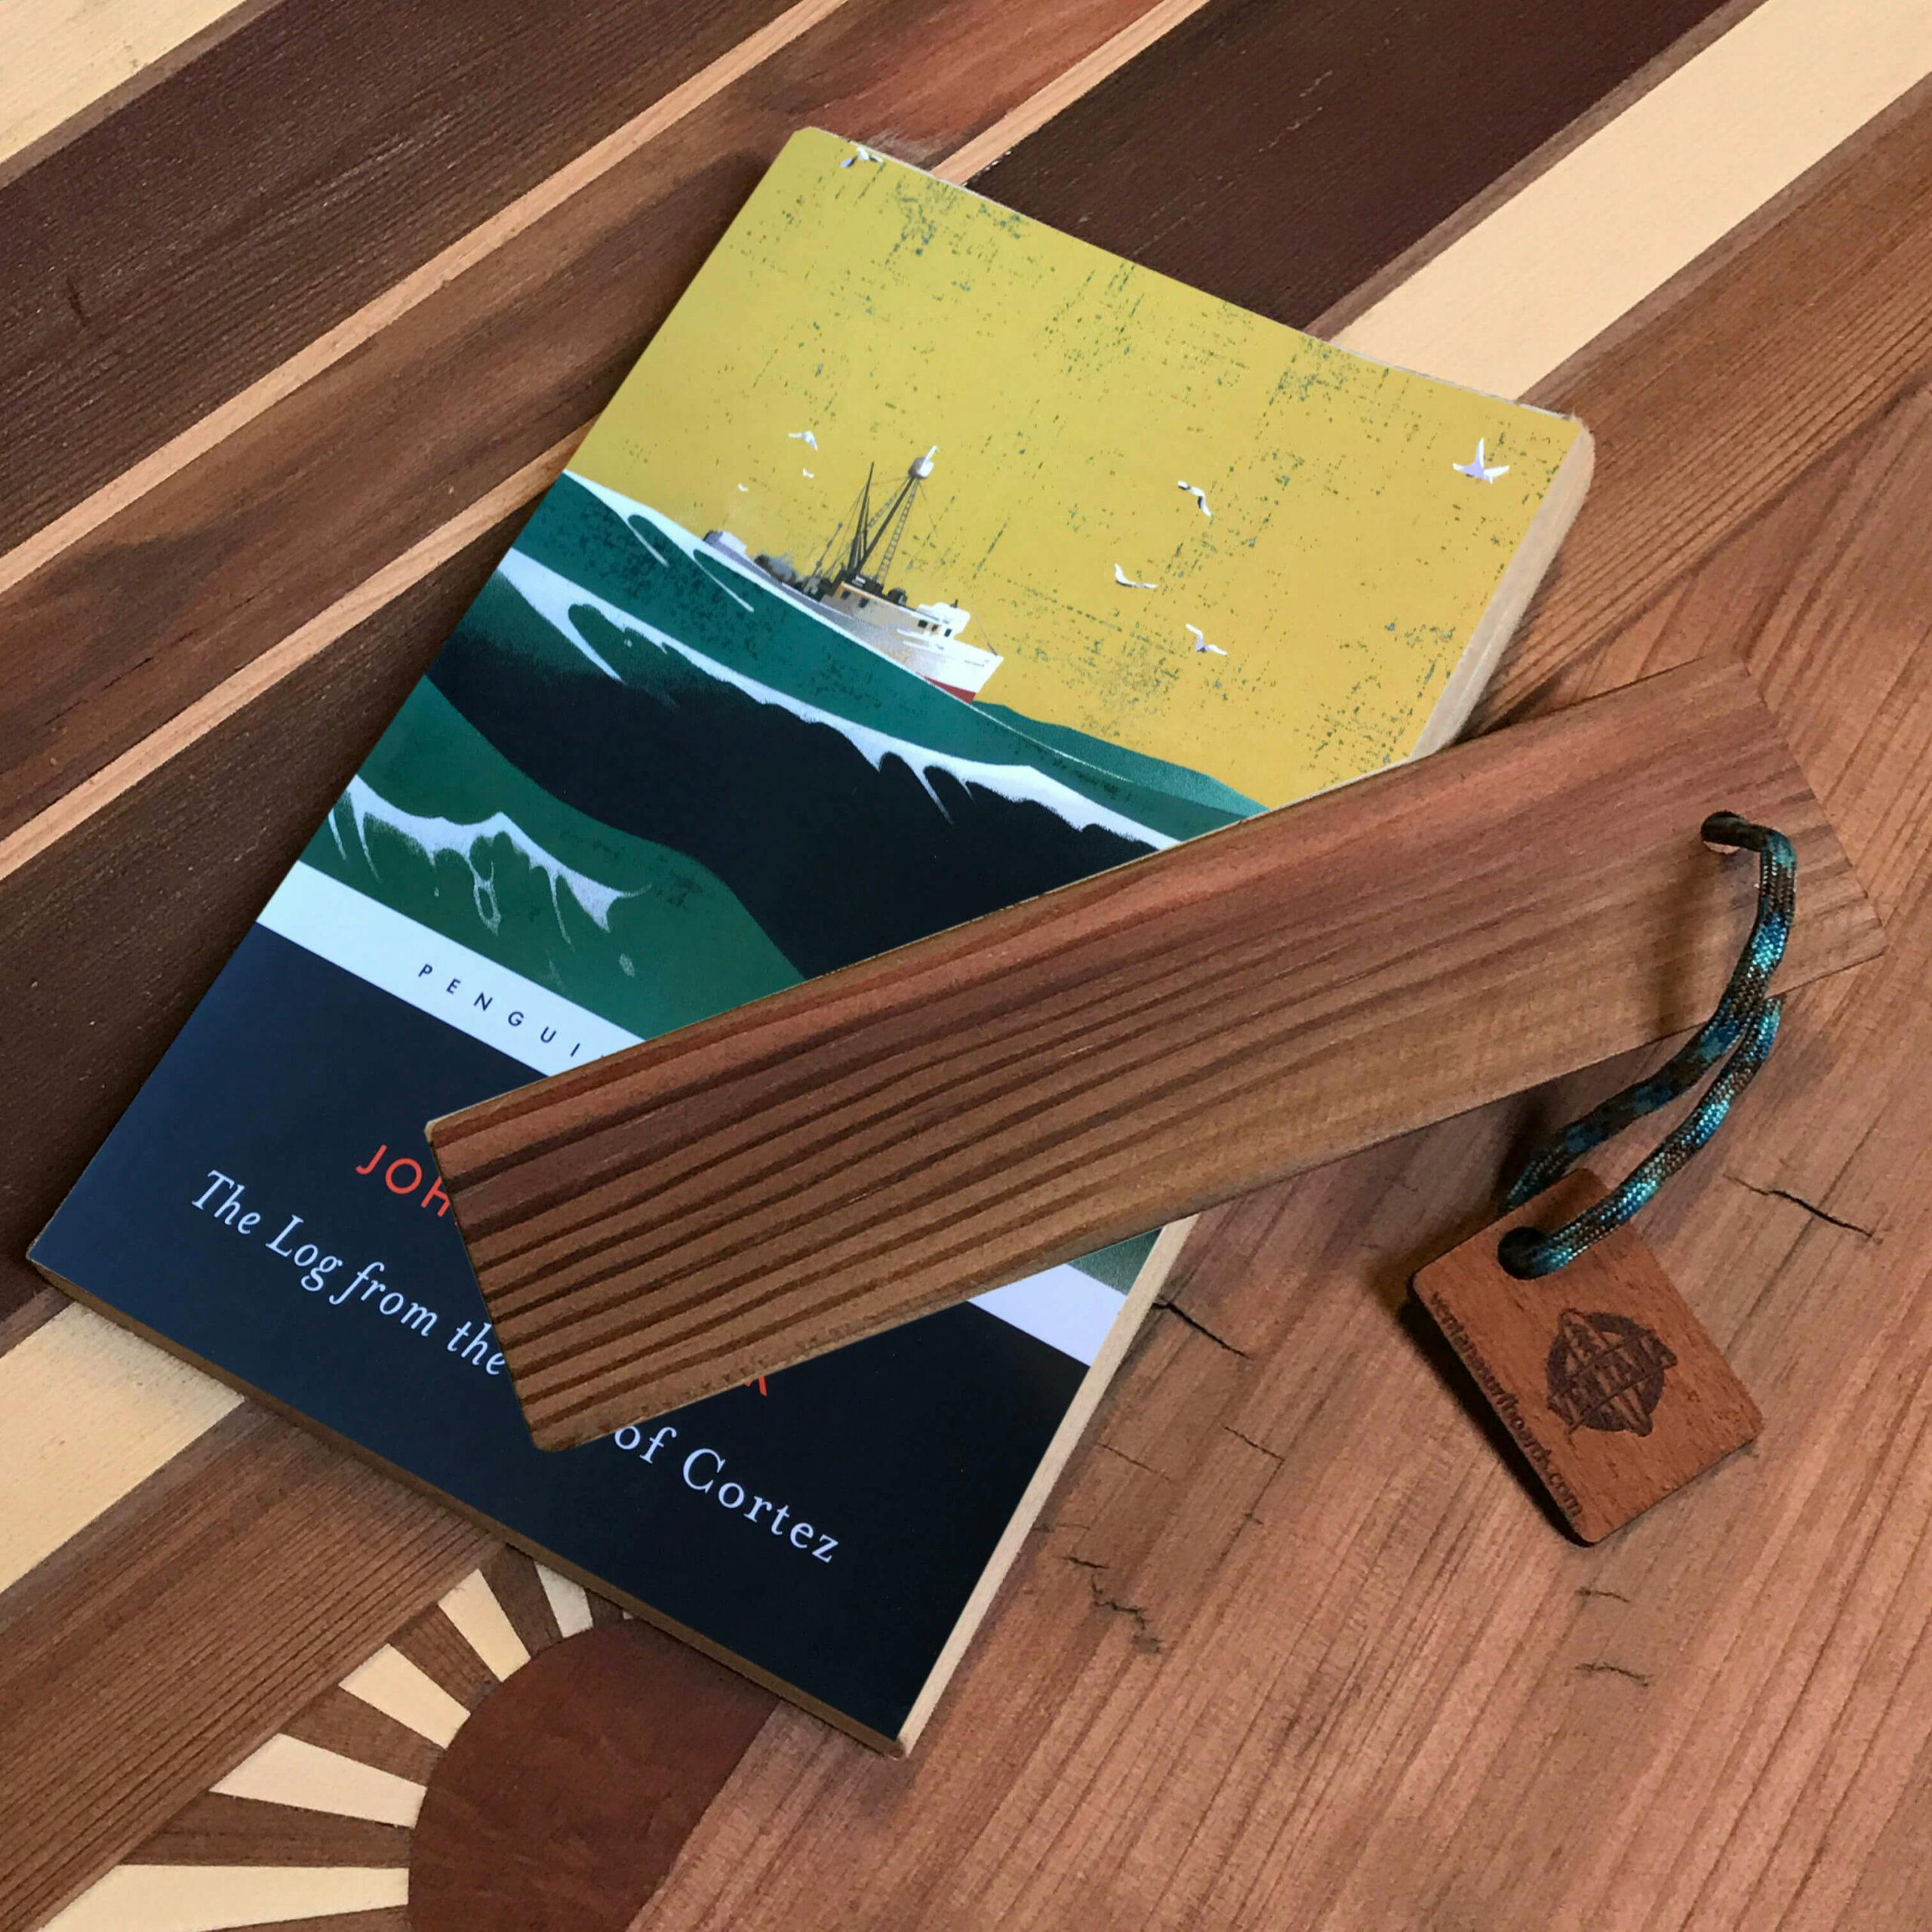 The Log from the Sea of Cortez book and a bookmark